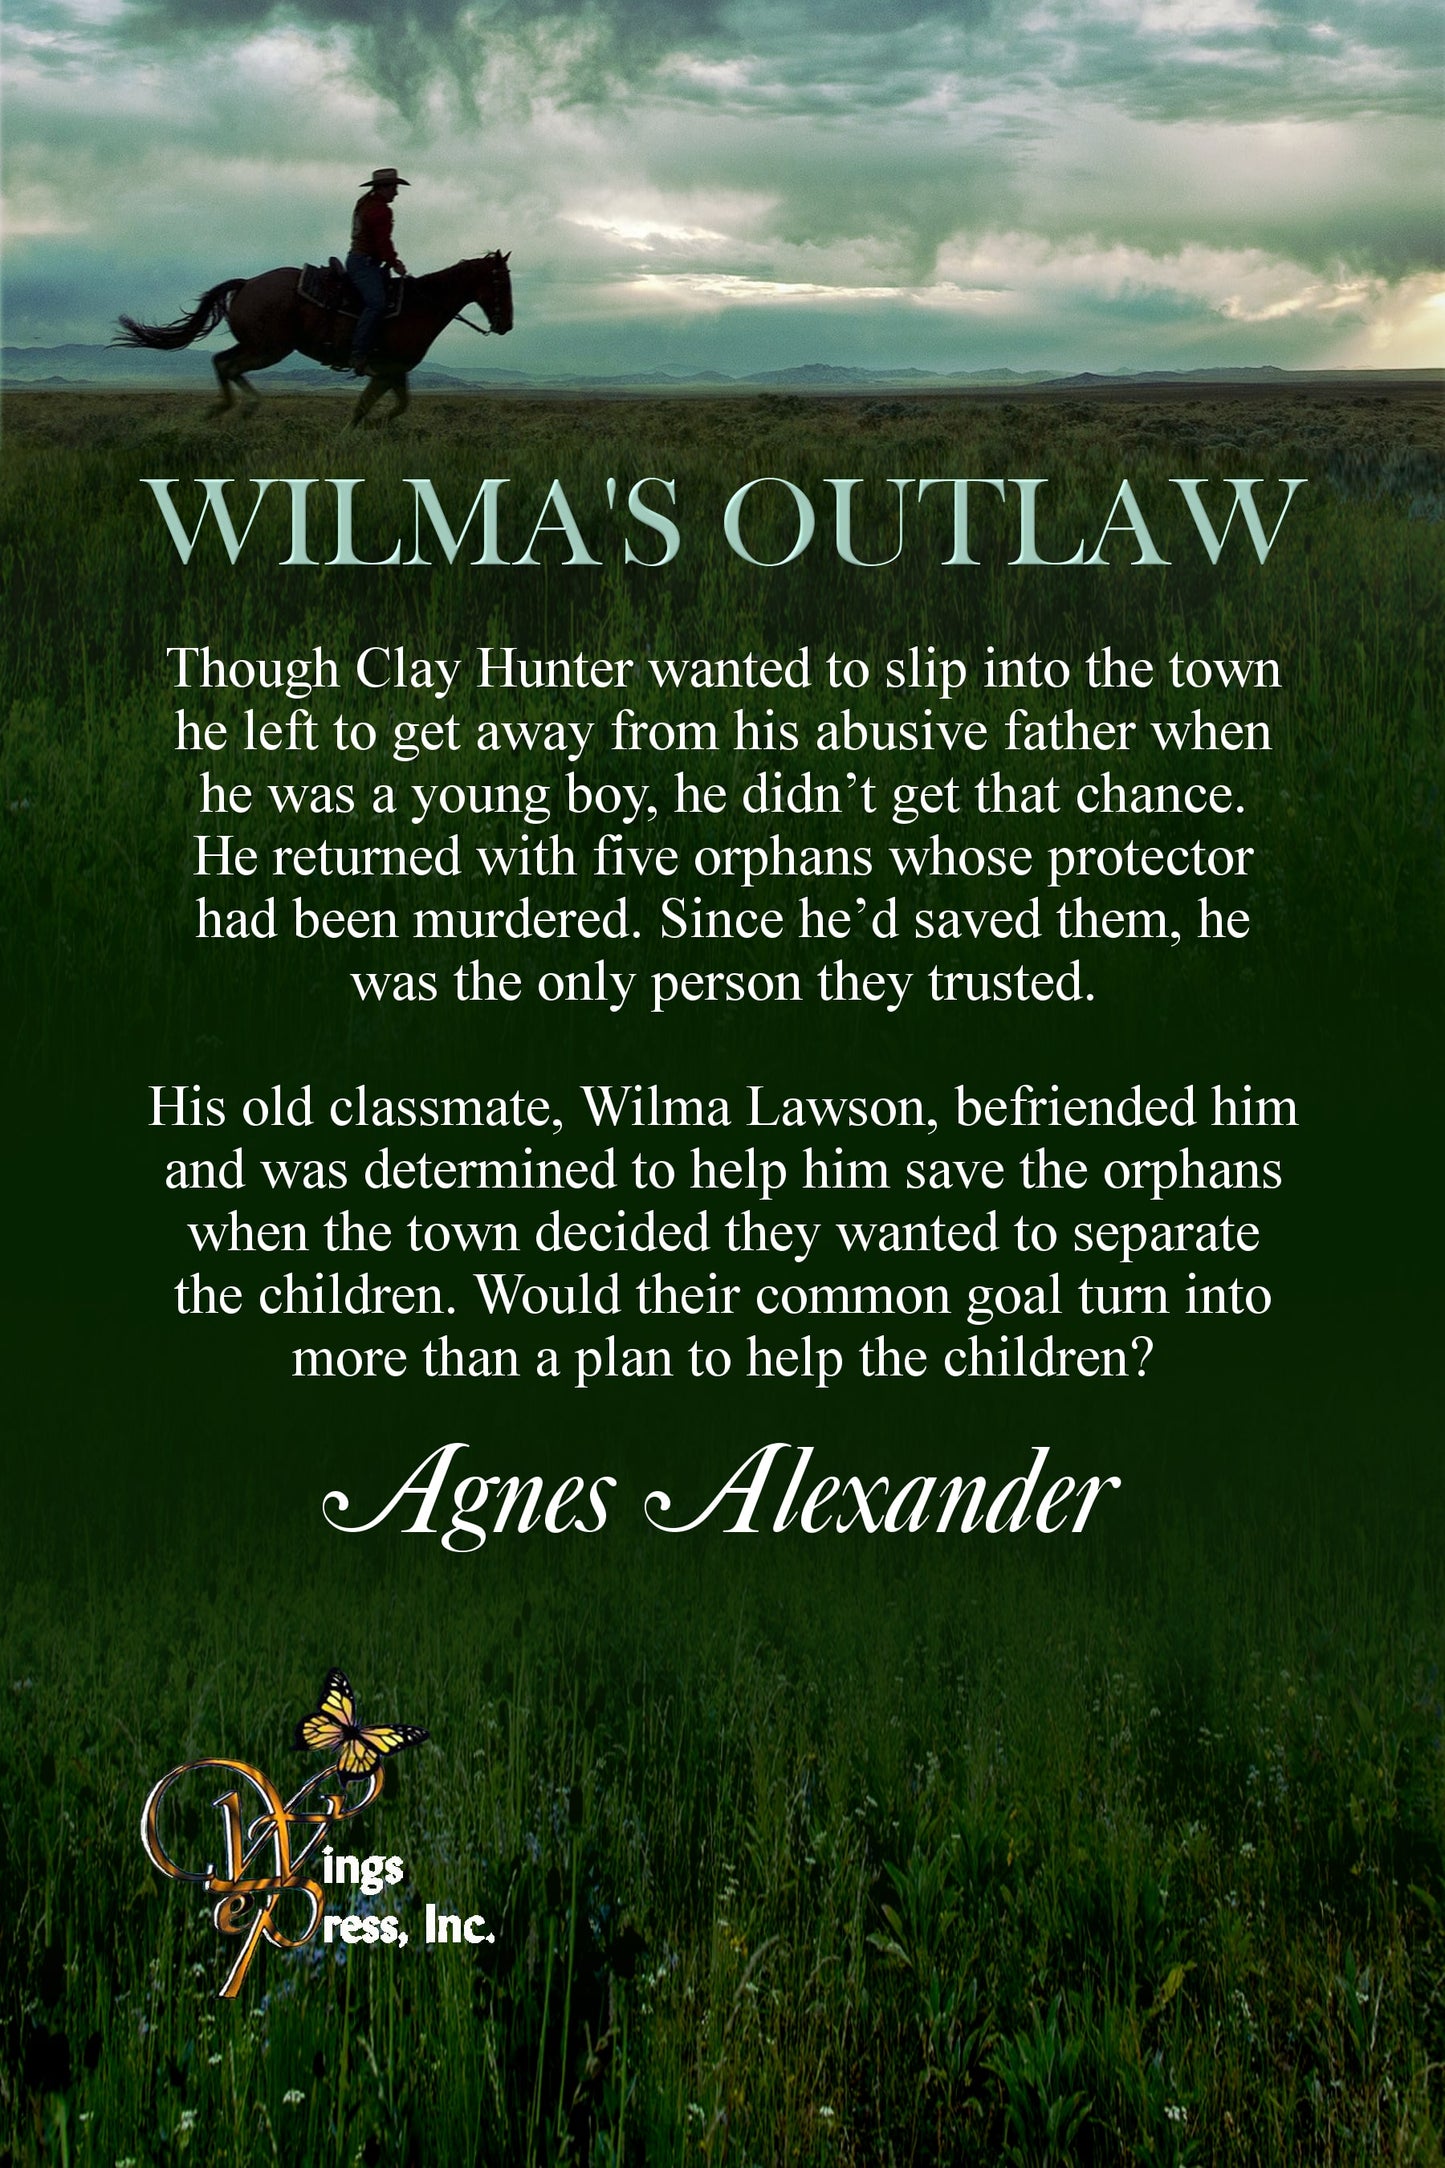 Wilma’s Outlaw